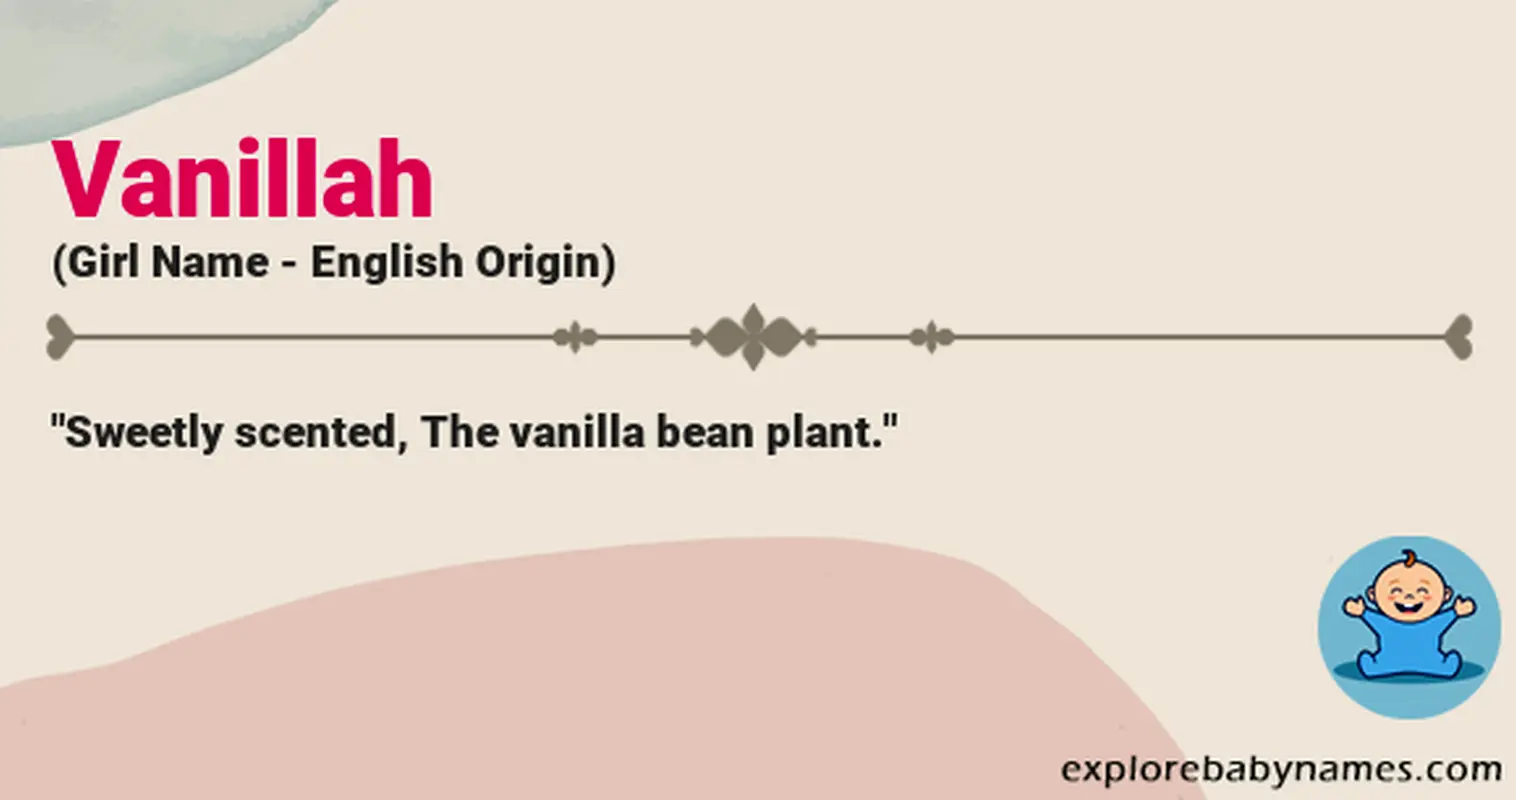 Meaning of Vanillah